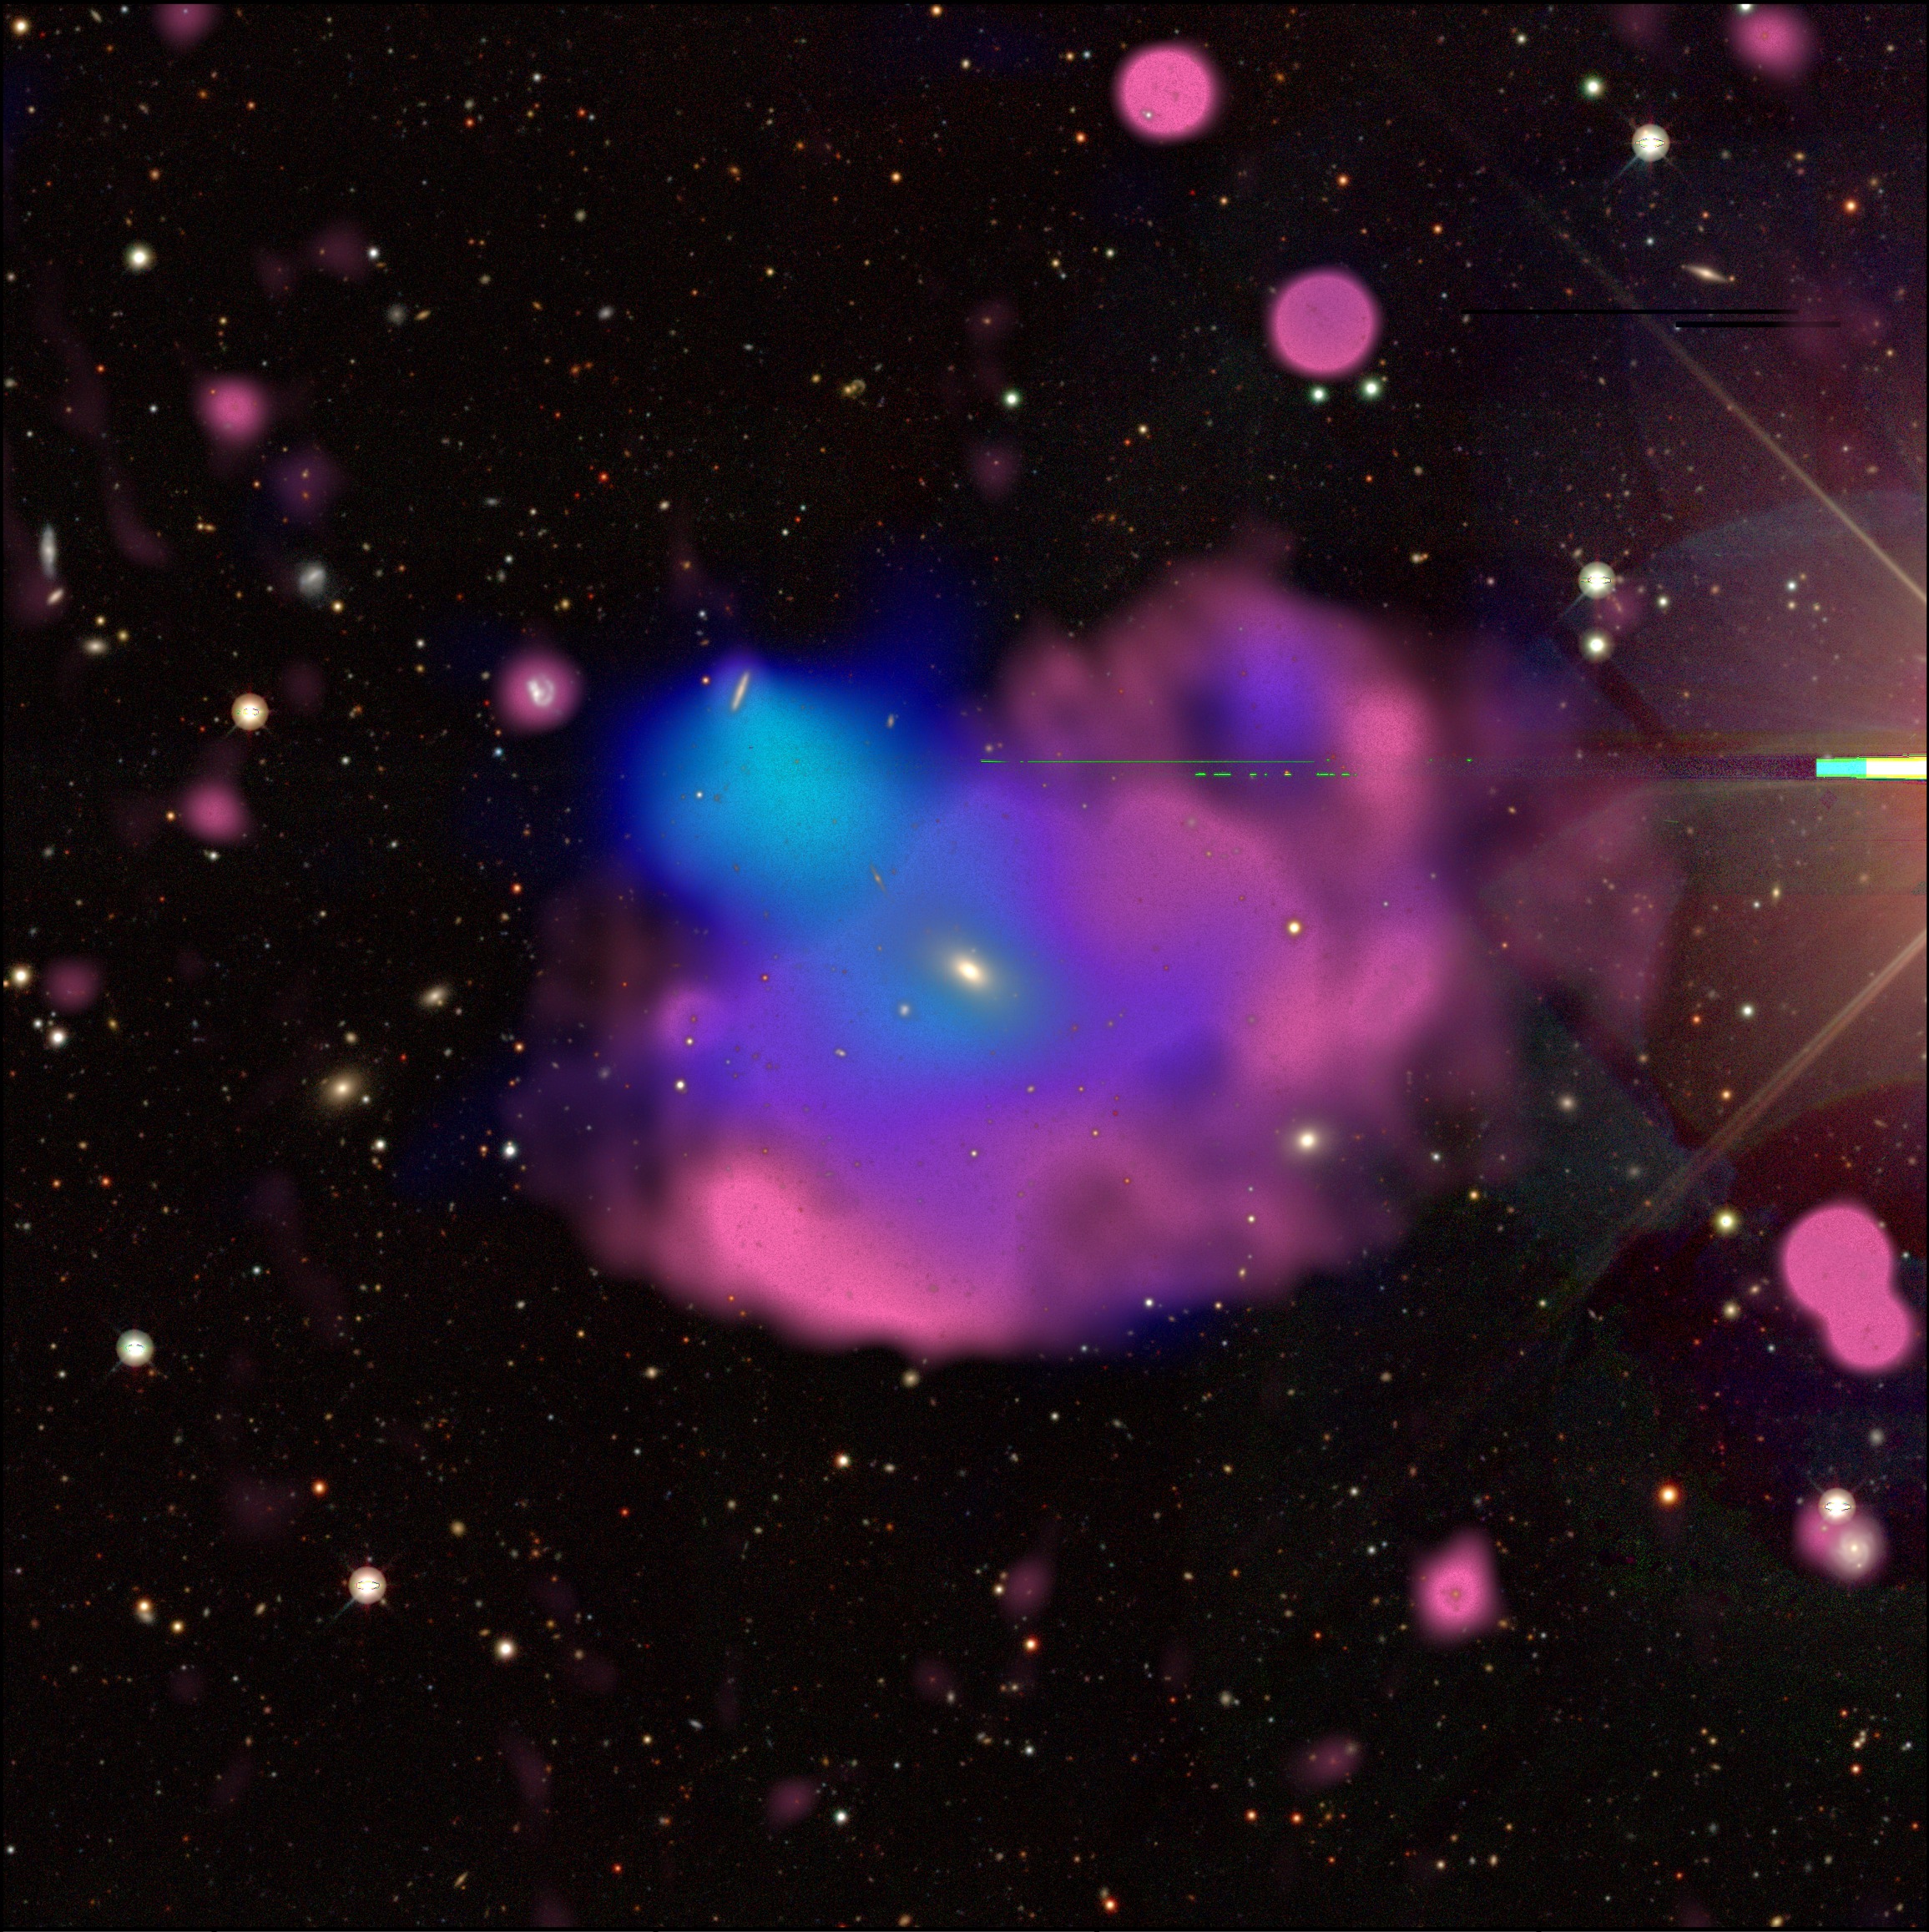 A mosaic of the Cloverleaf radio emission in multiple wavelengths: visible light observations from the DESI (Dark Energy Spectroscopic Instrument) Legacy Survey in white and yellow; X-rays from XMM-Newton in blue; and radio from ASKAP (the Australian Square Kilometer Array Pathfinder) in red. Credit: Xiaoyuan Zhang & Matthias Kluge (MPE), Baerbel Korbalski (CSIRO).